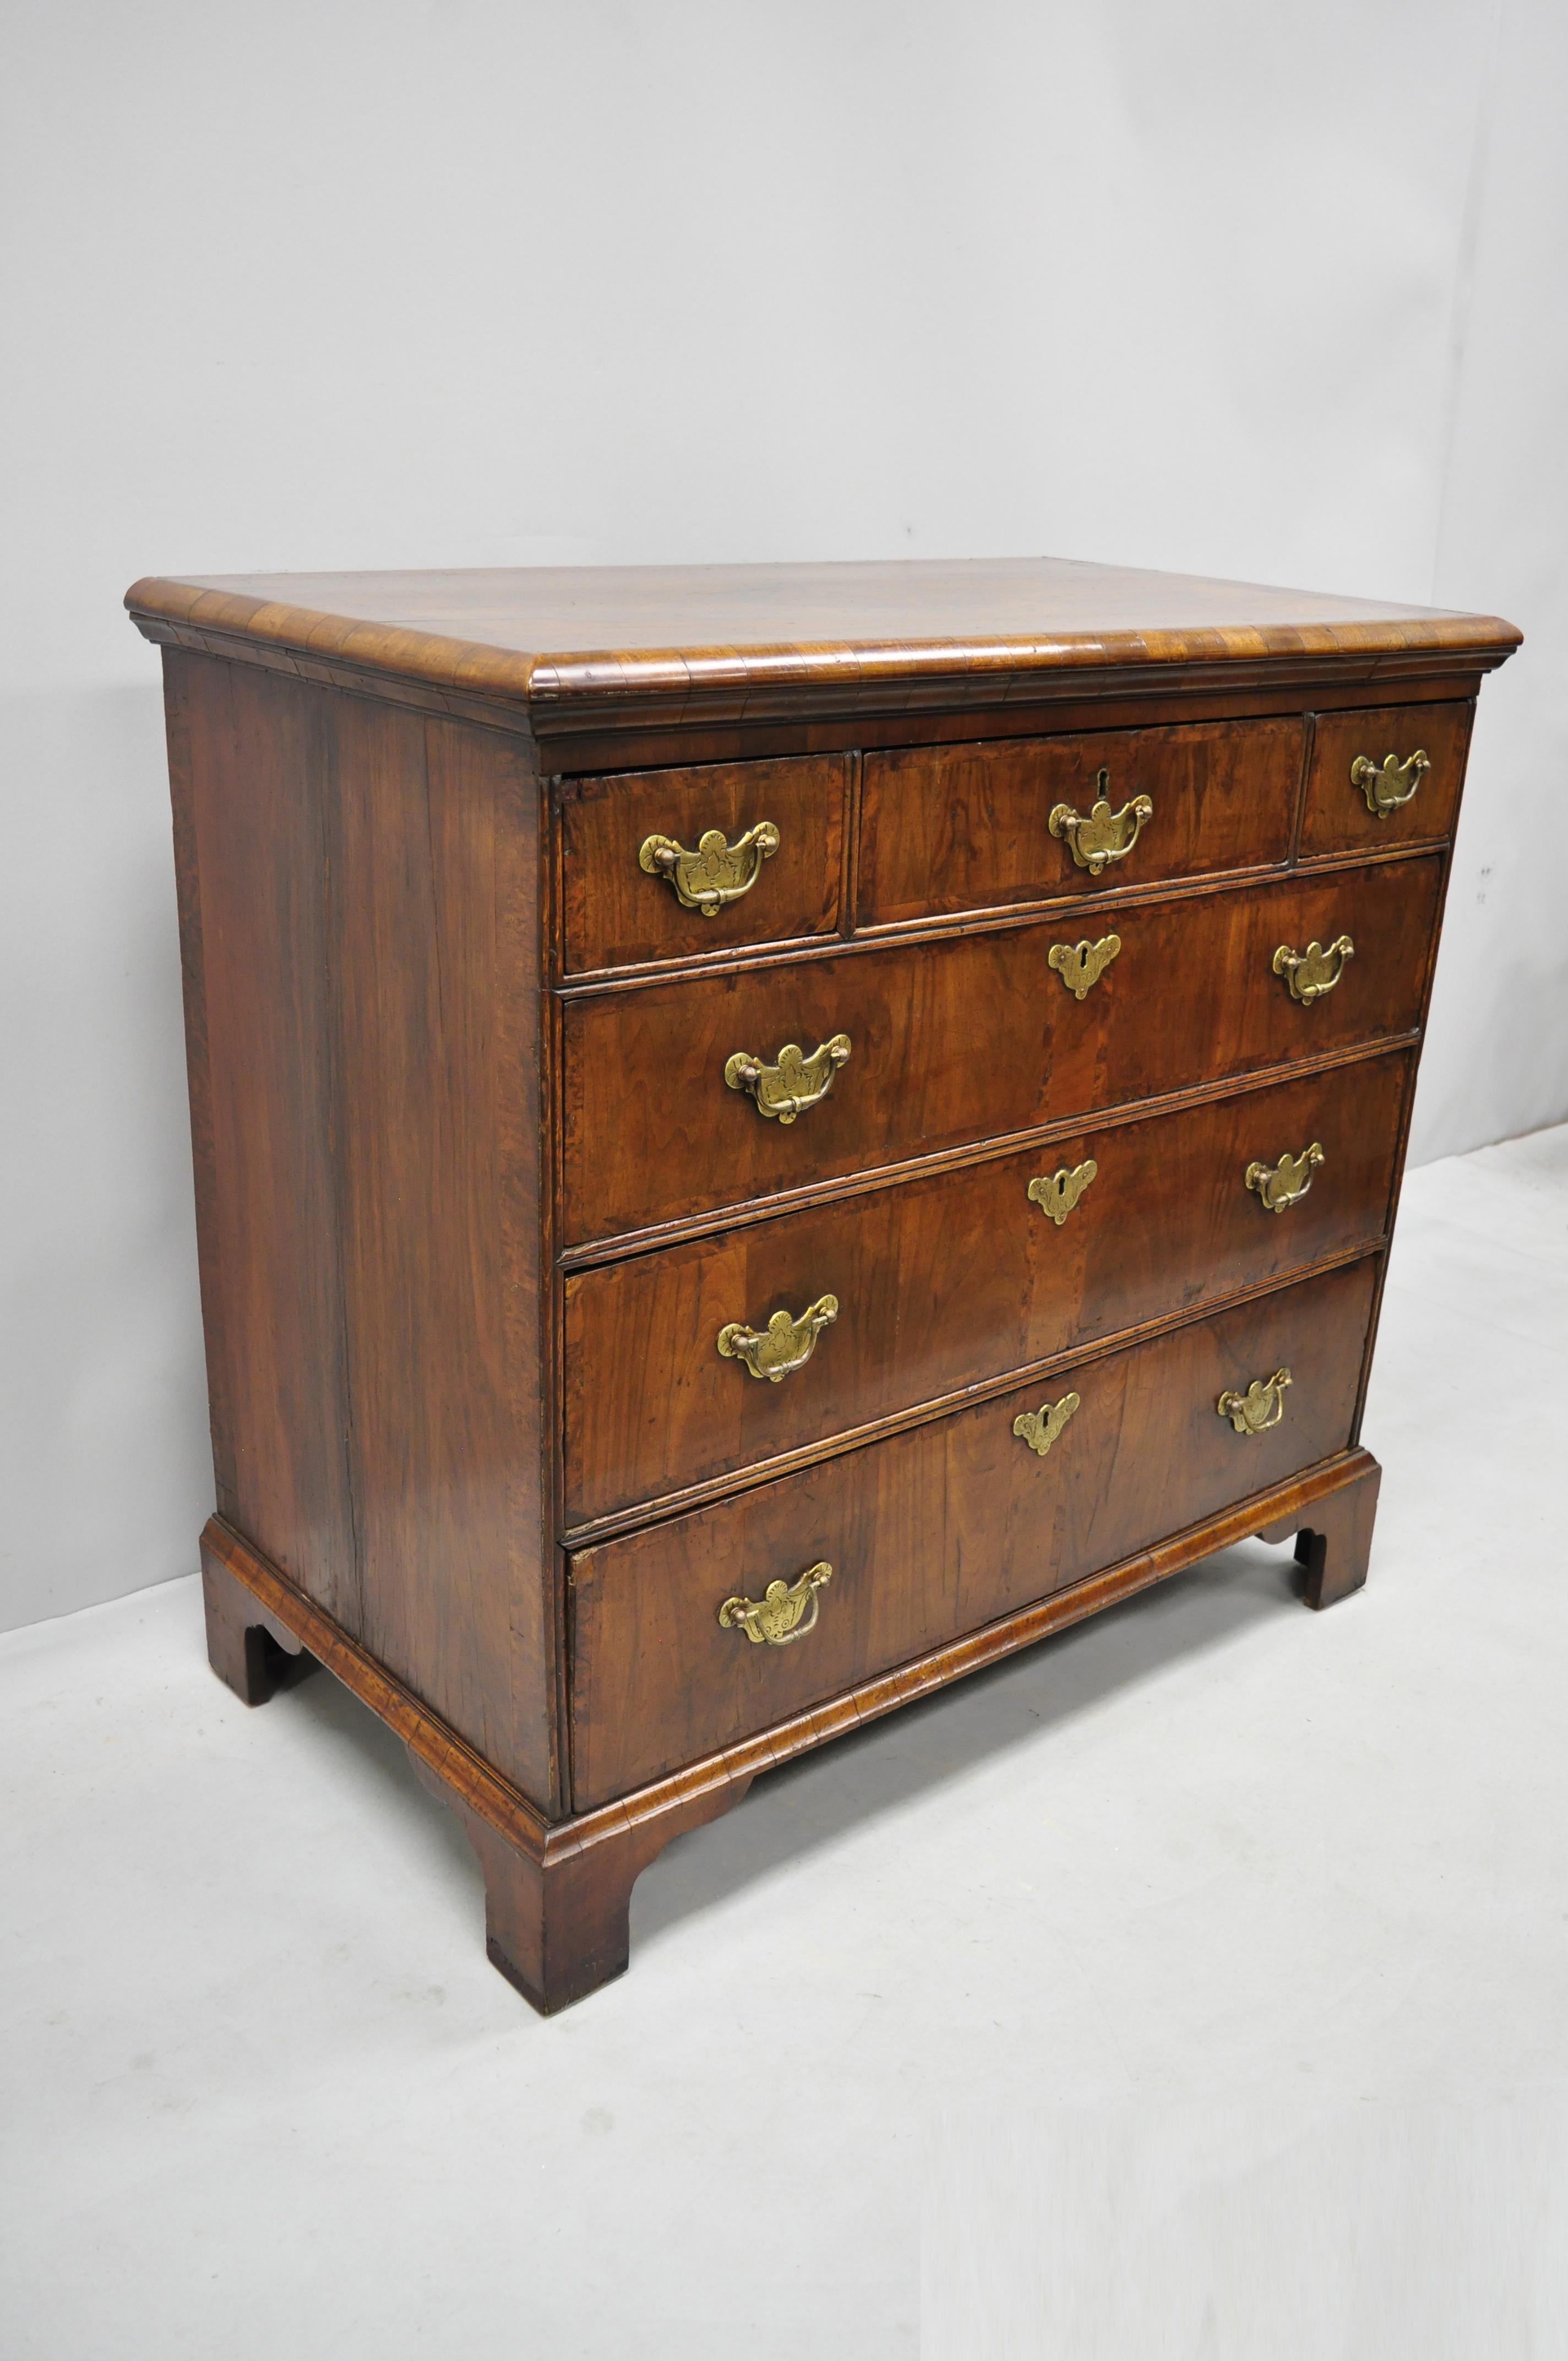 19th century English Queen Anne burr walnut inlaid 6-drawer chest. Item features beautiful wood grain, original distressed finish and patina, original label, no key but unlocked, 6 dovetailed drawers, solid brass hardware, nice inlay, quality